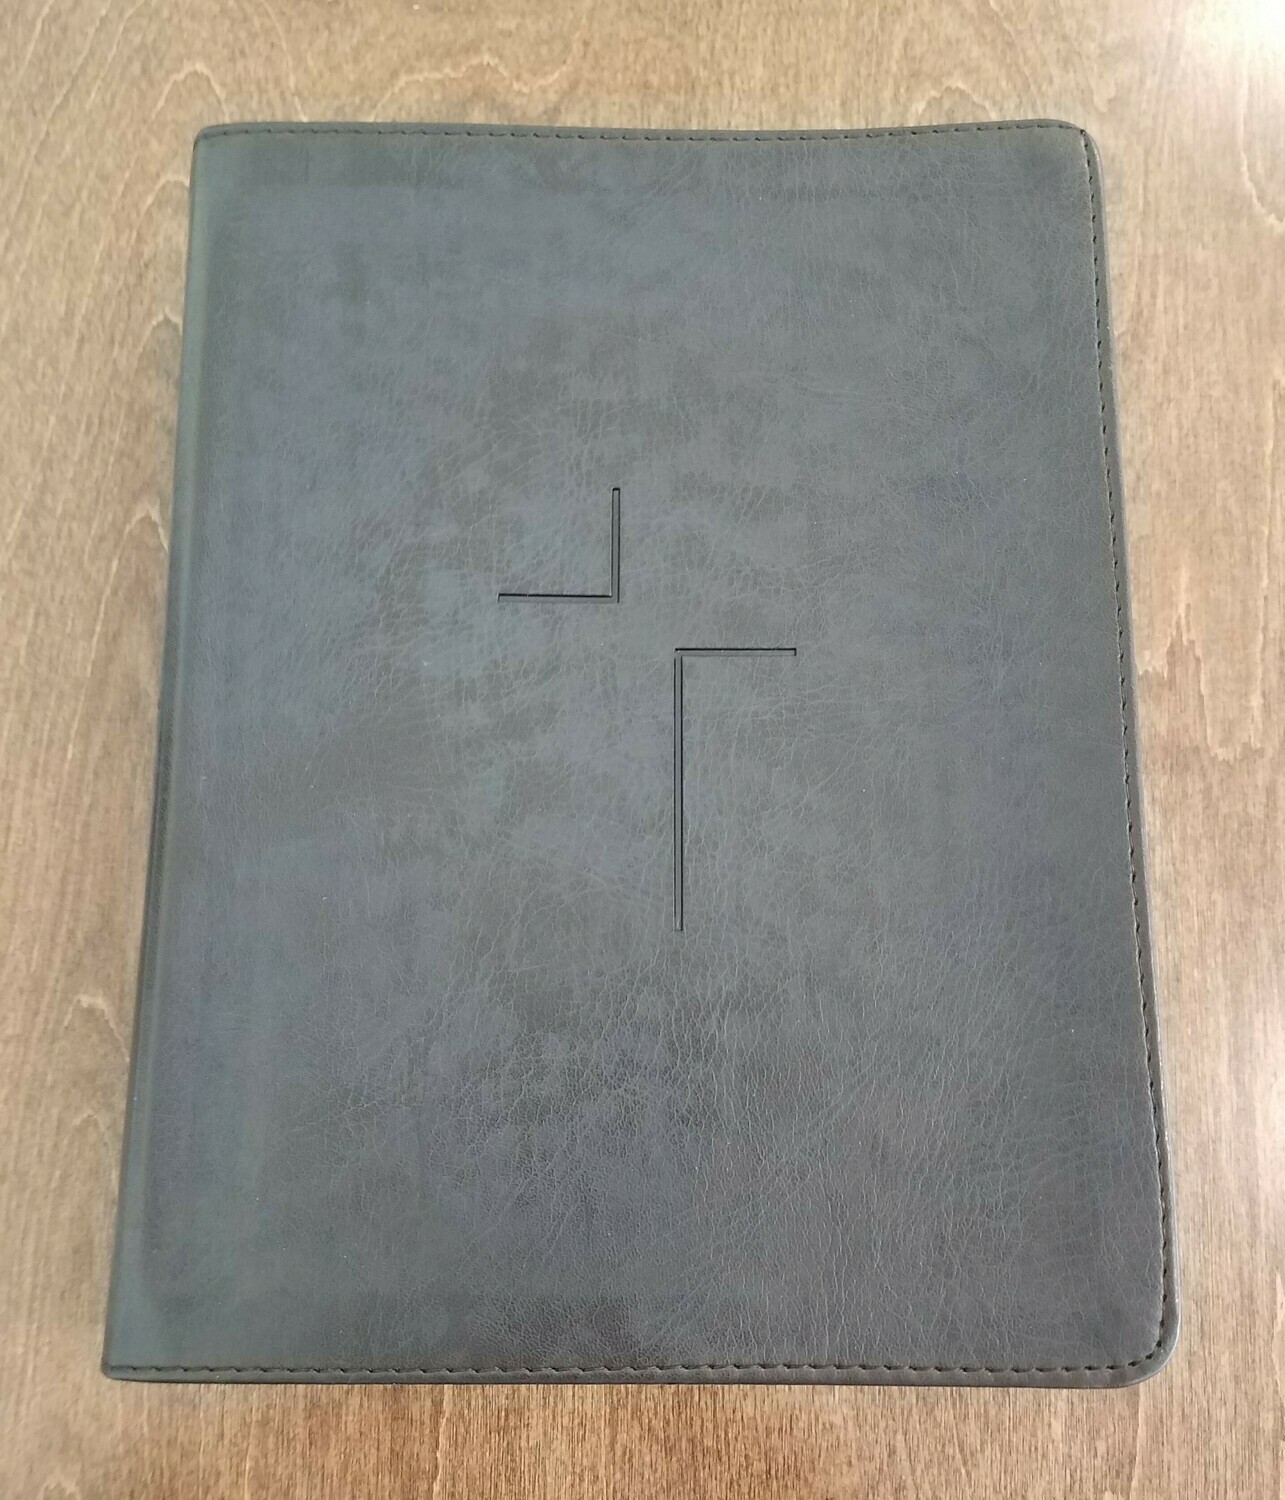 The NIV Jesus Bible - Softcover, Black Leather